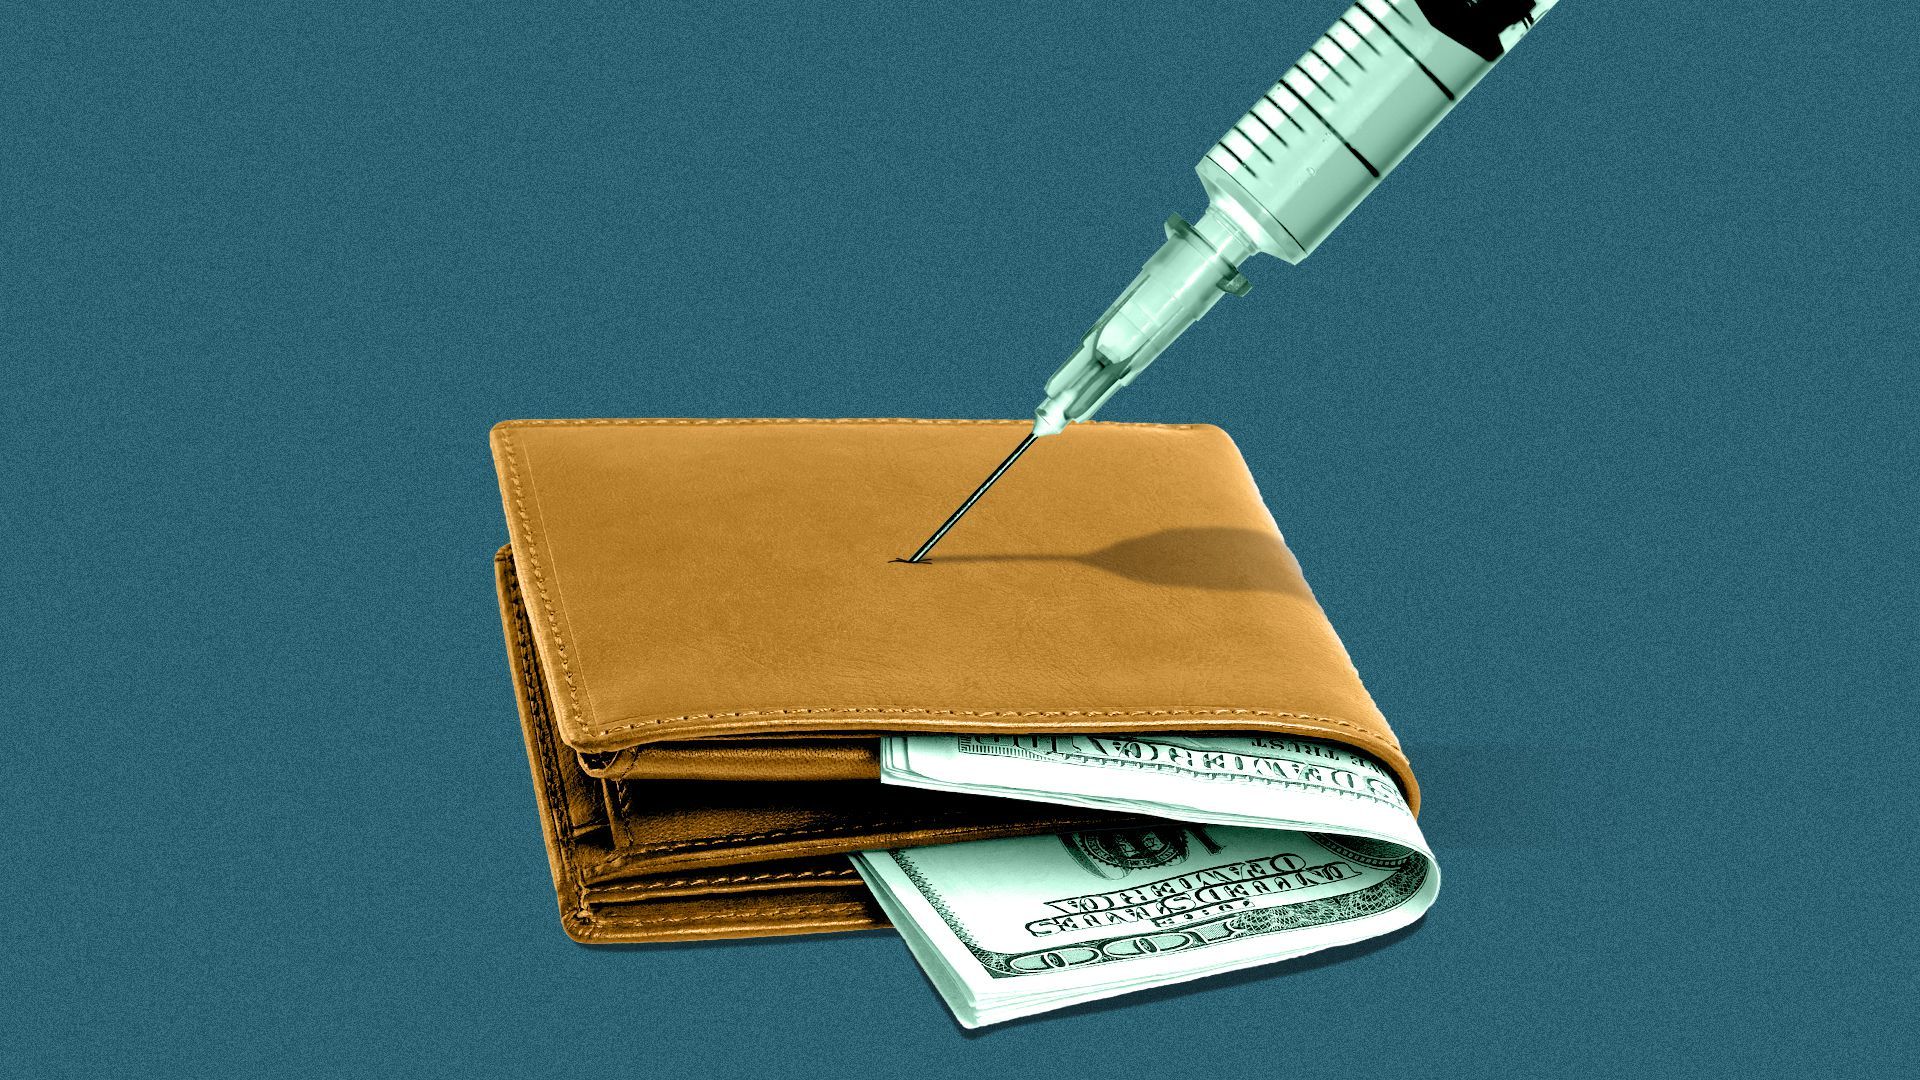 Illustration of a wallet with hundred-dollar bills inside it, and a syringe being stuck into it.